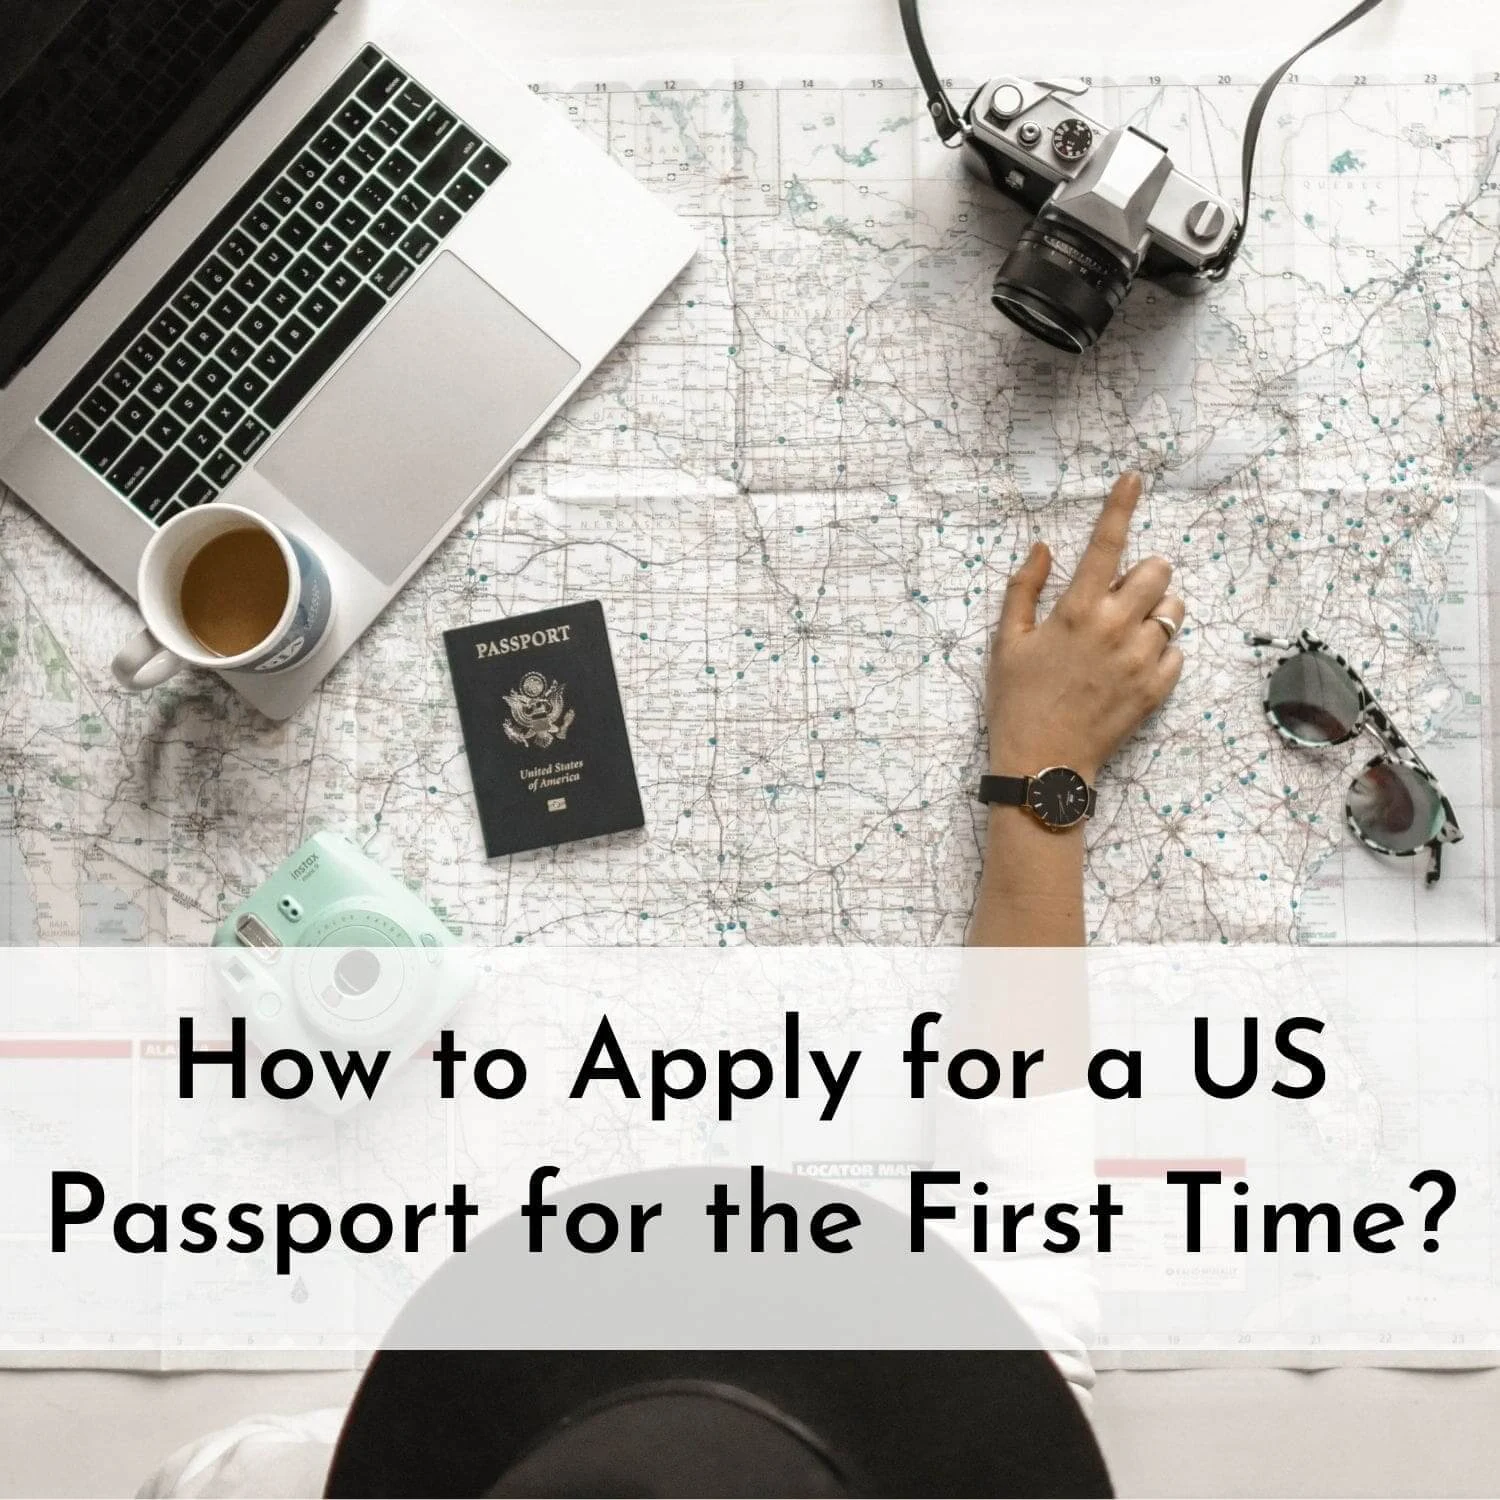 How to Apply for US Passport the First Time After Naturalization